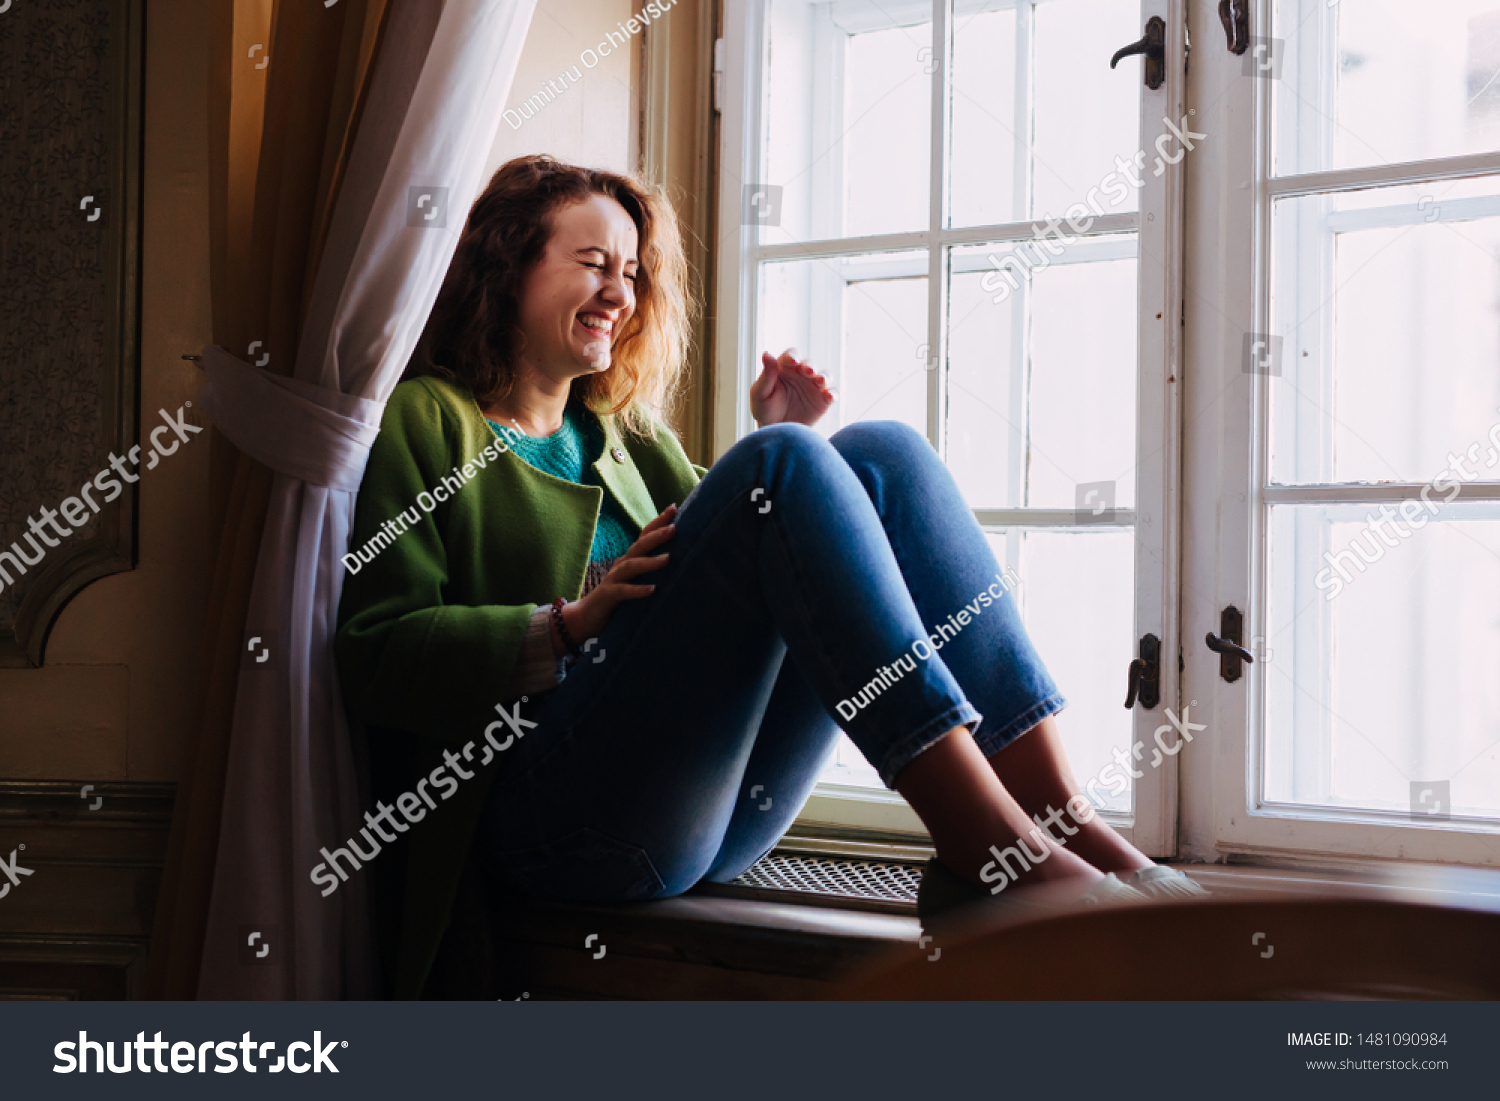 Natural woman laughing spontaneously  near a window. Warm dressed caucasian girl with curly hair. #1481090984